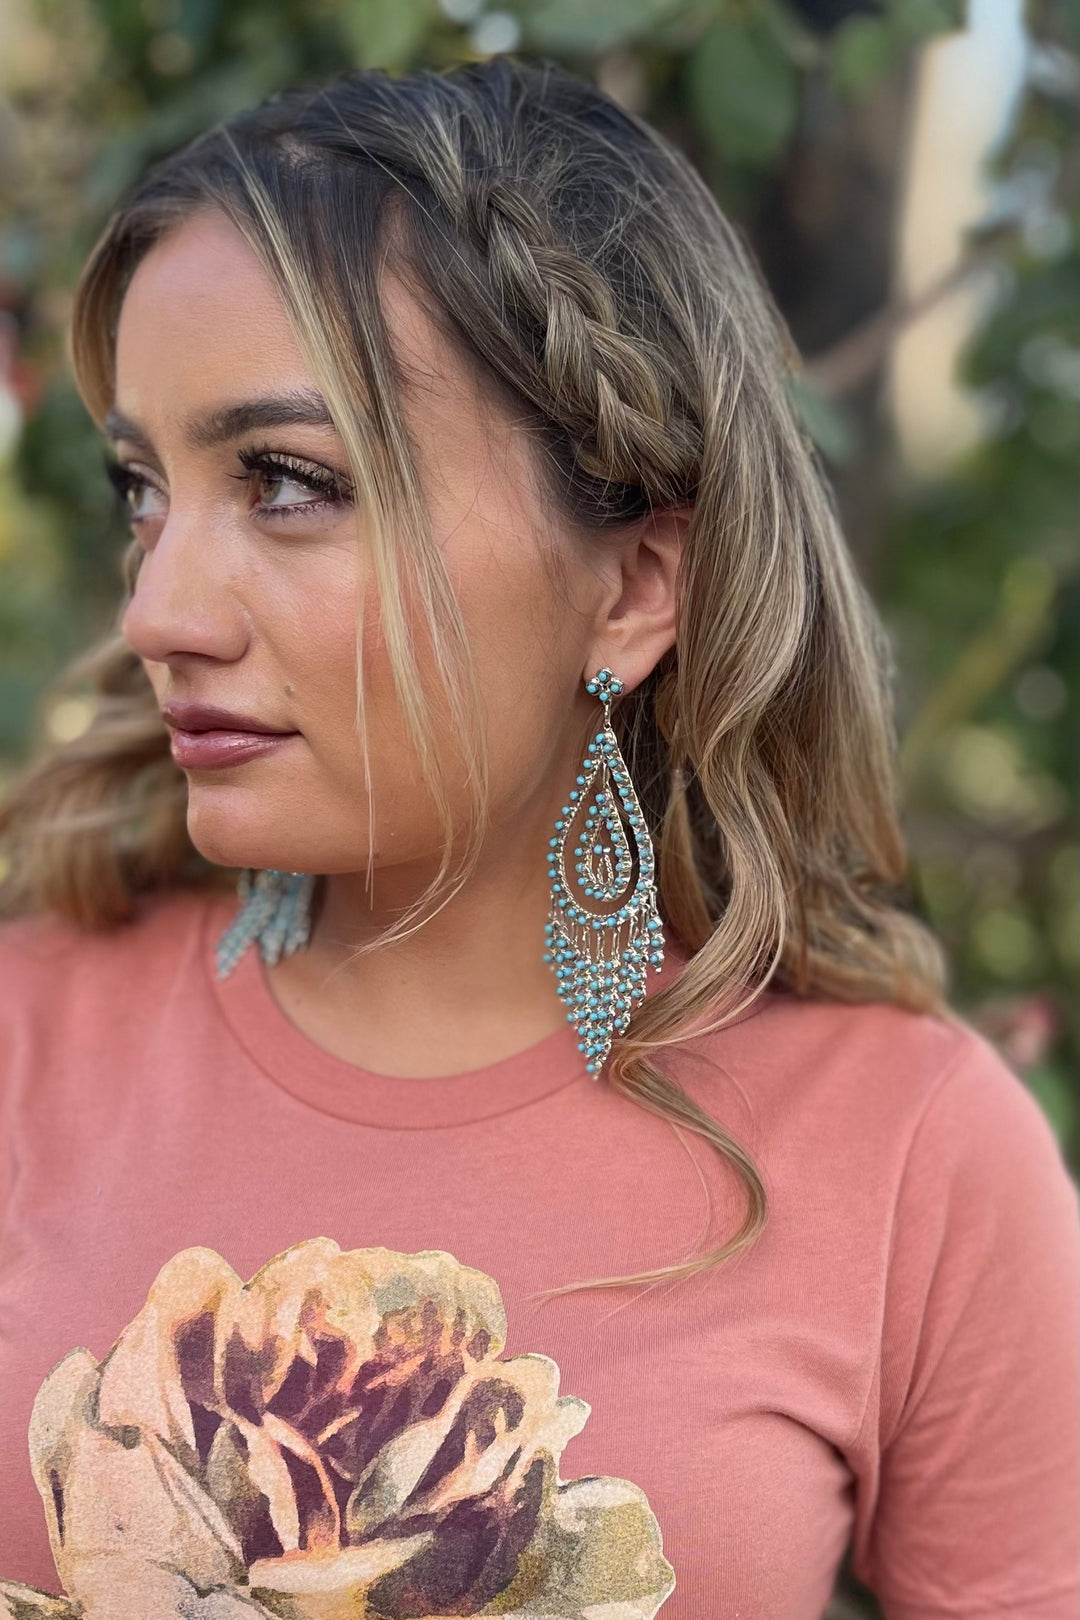 The Love of Turquoise Earrings